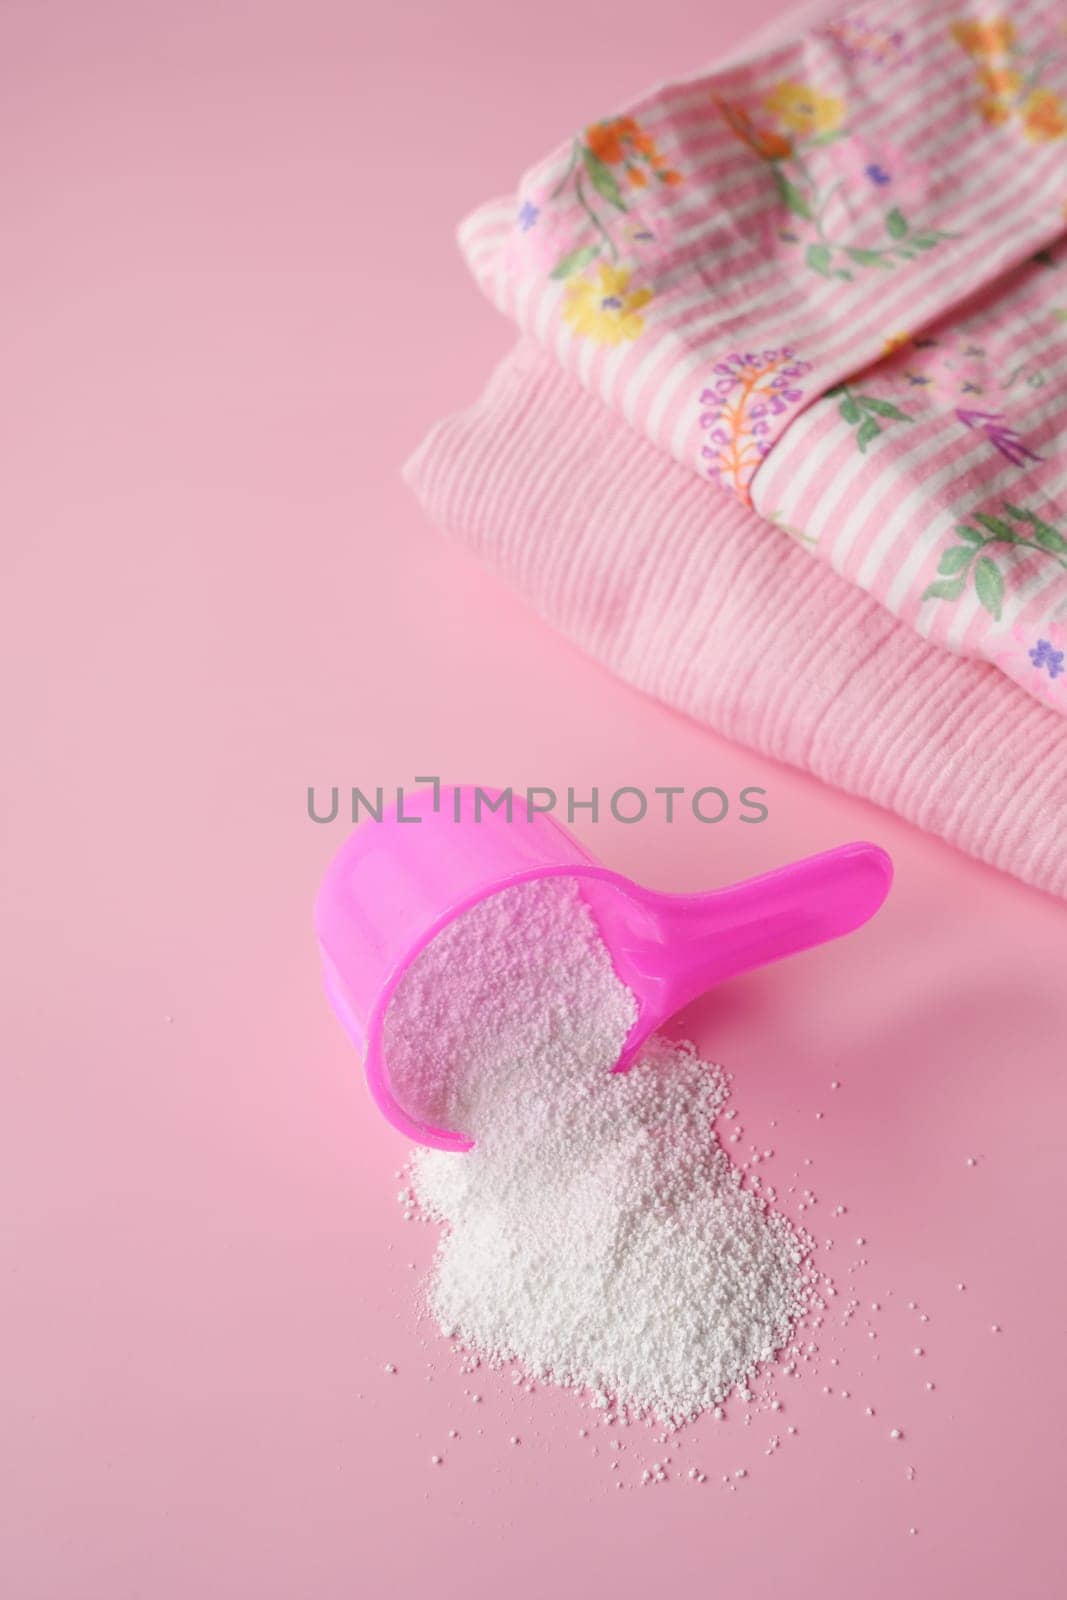 Washing powder in plastic spoon on blue background by towfiq007